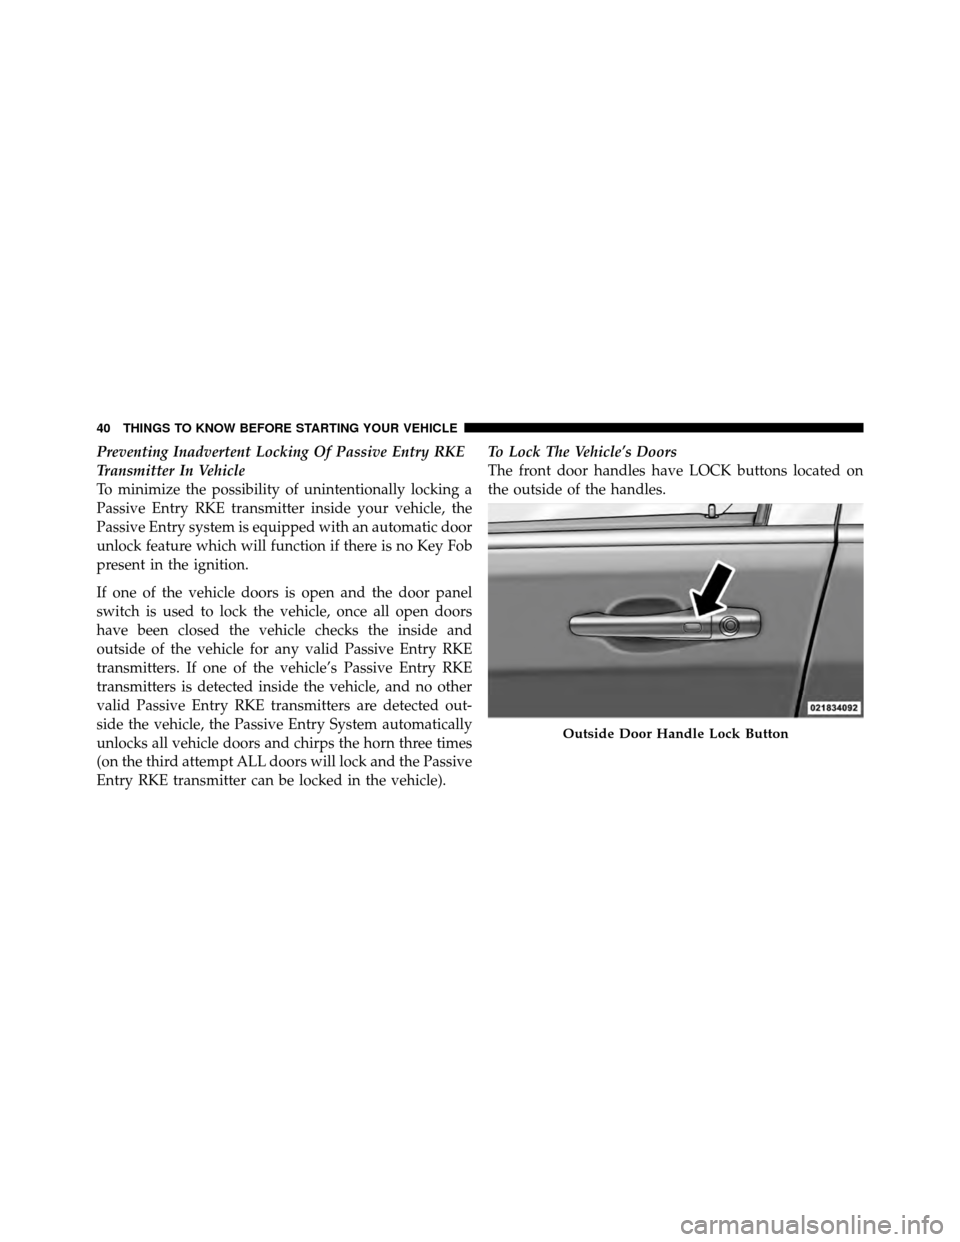 CHRYSLER TOWN AND COUNTRY 2012 5.G Service Manual Preventing Inadvertent Locking Of Passive Entry RKE
Transmitter In Vehicle
To minimize the possibility of unintentionally locking a
Passive Entry RKE transmitter inside your vehicle, the
Passive Entry